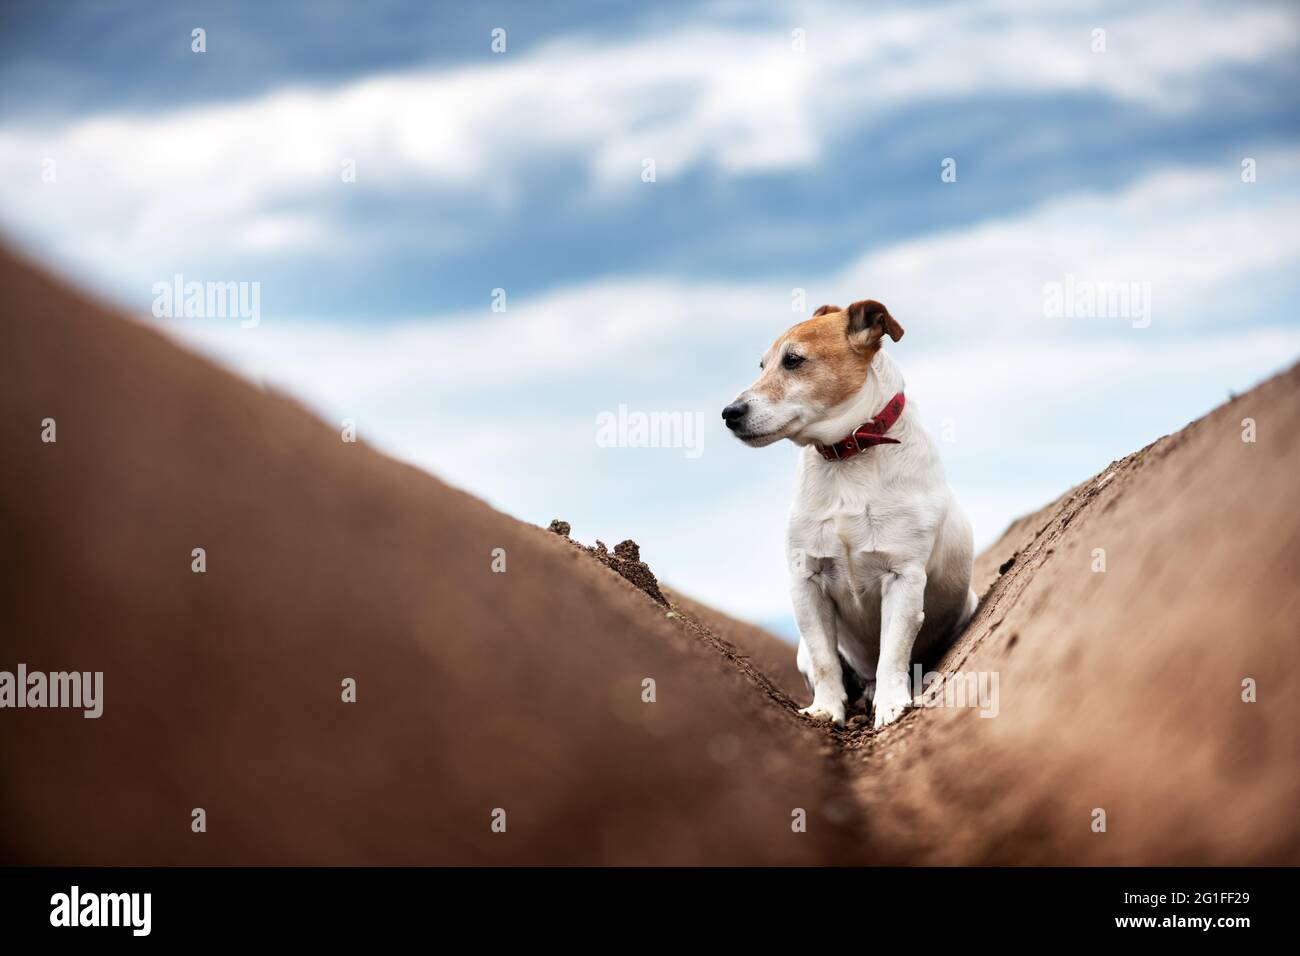 Jack russel terrier between soil rows before planting on plowed agricultural field prepared for planting crops in spring Stock Photo